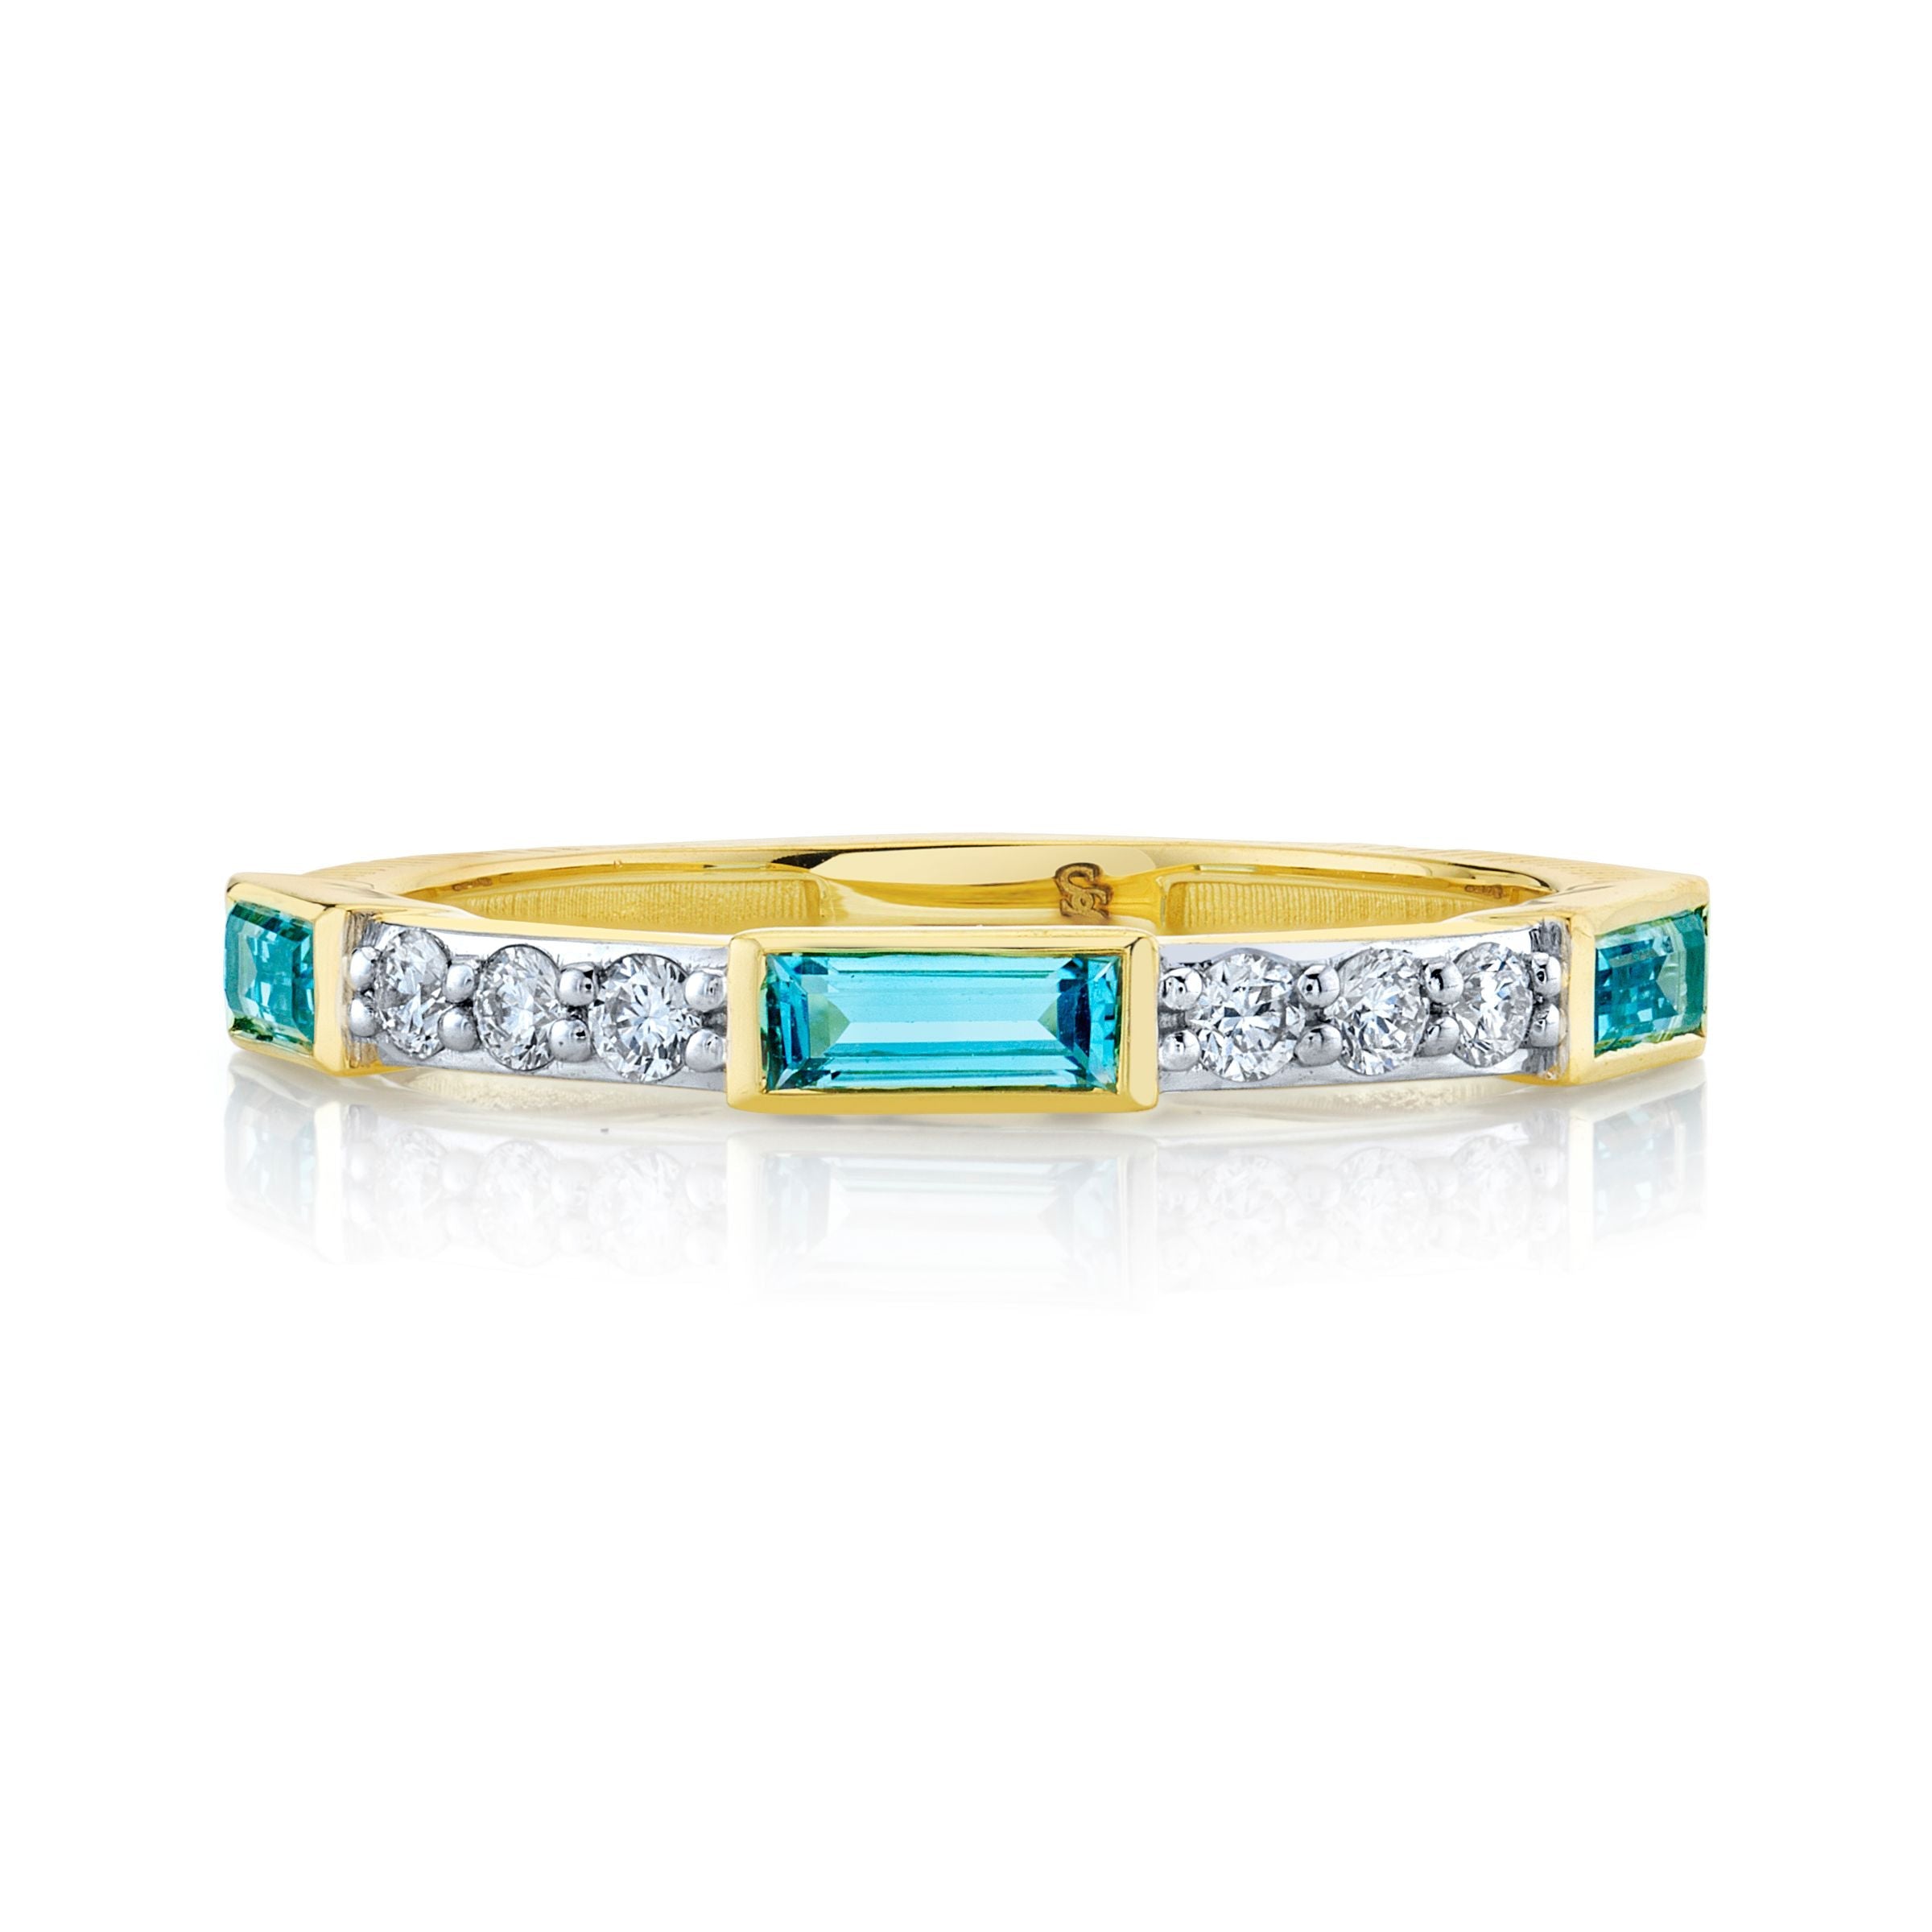 Turquoise Band with White Diamond Details